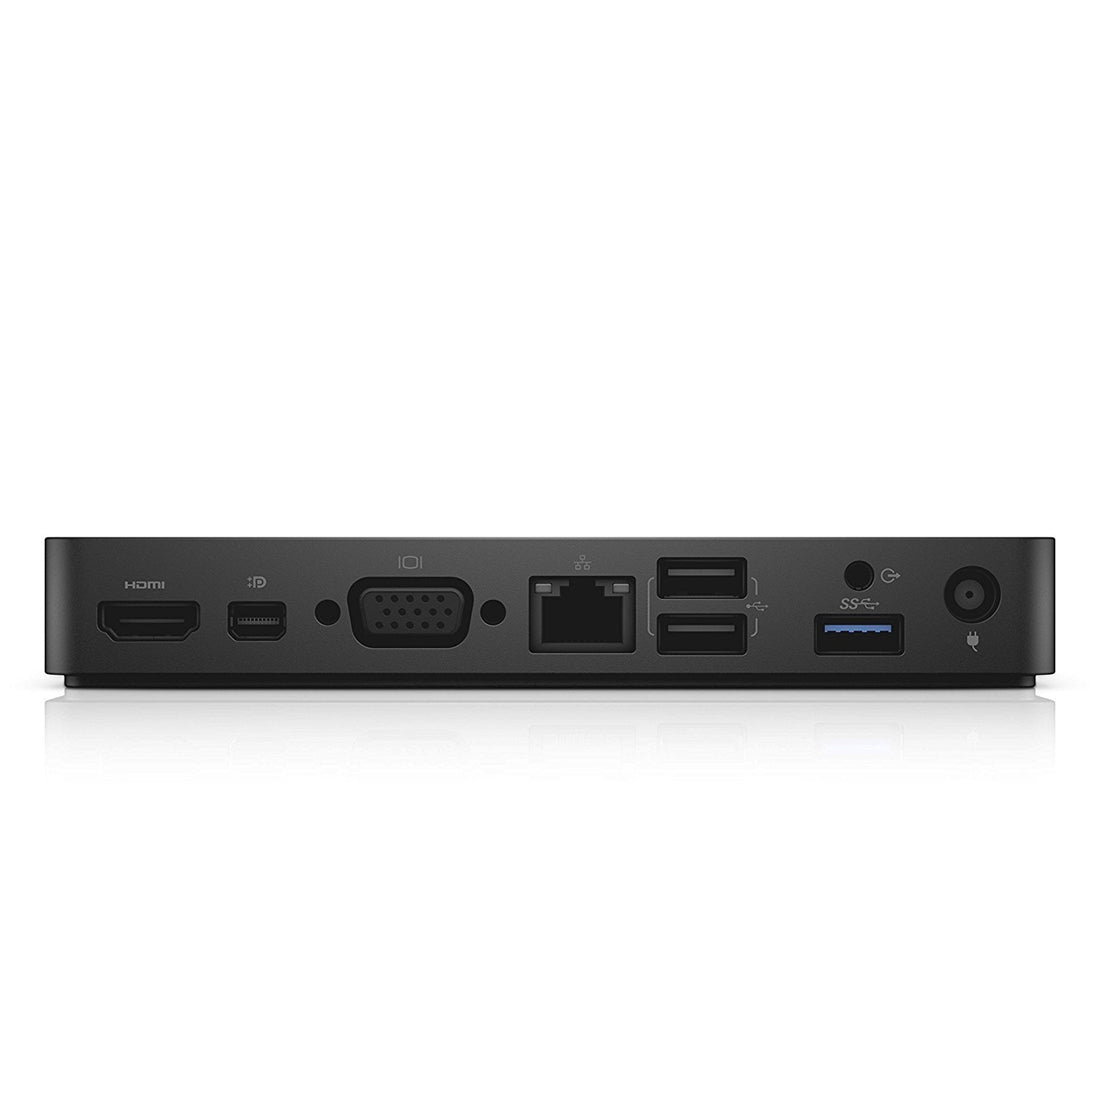 [RePacked] Dell WD15 USB Type-C Docking Station with  4K Support and SuperSpeed USB 3.0